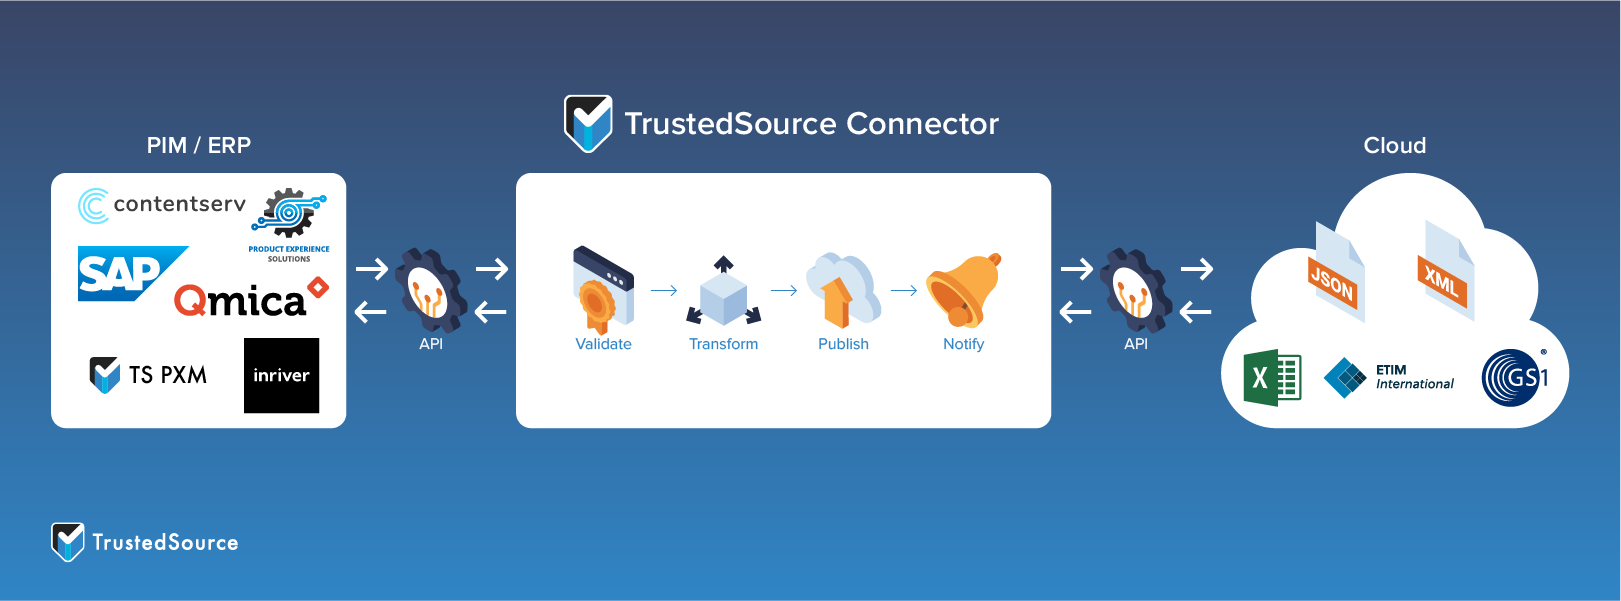 TrustedSource GDSN Connector